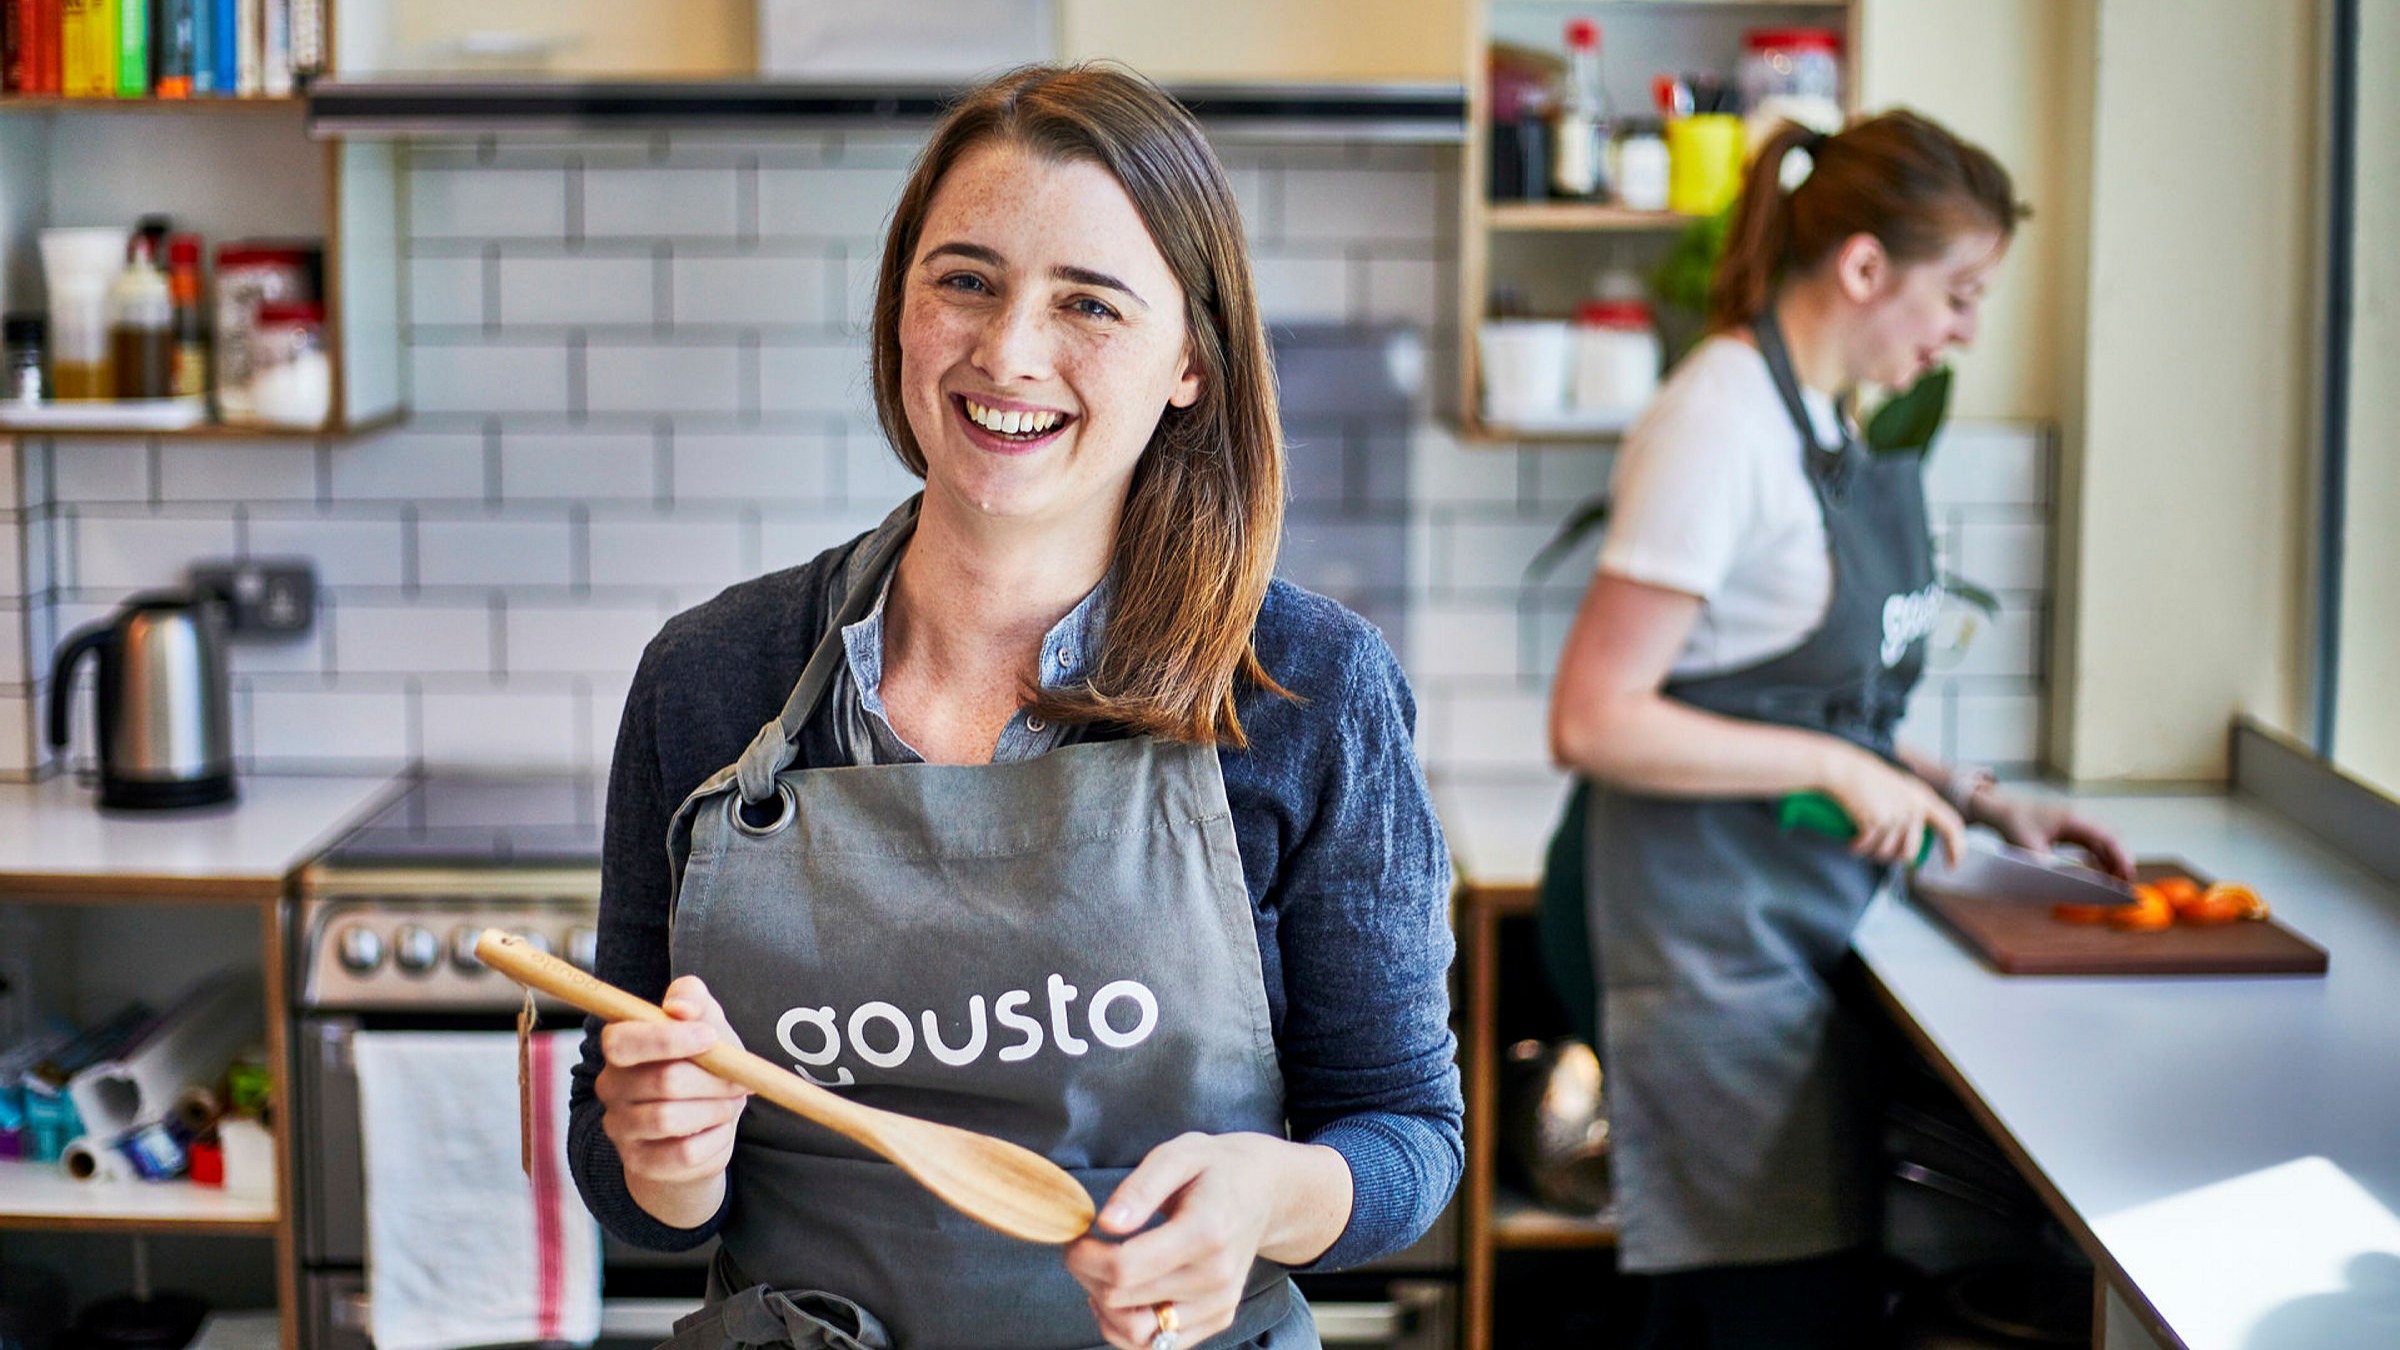 Food box provider Gousto set to recruit 1,000 extra staff | Financial Times